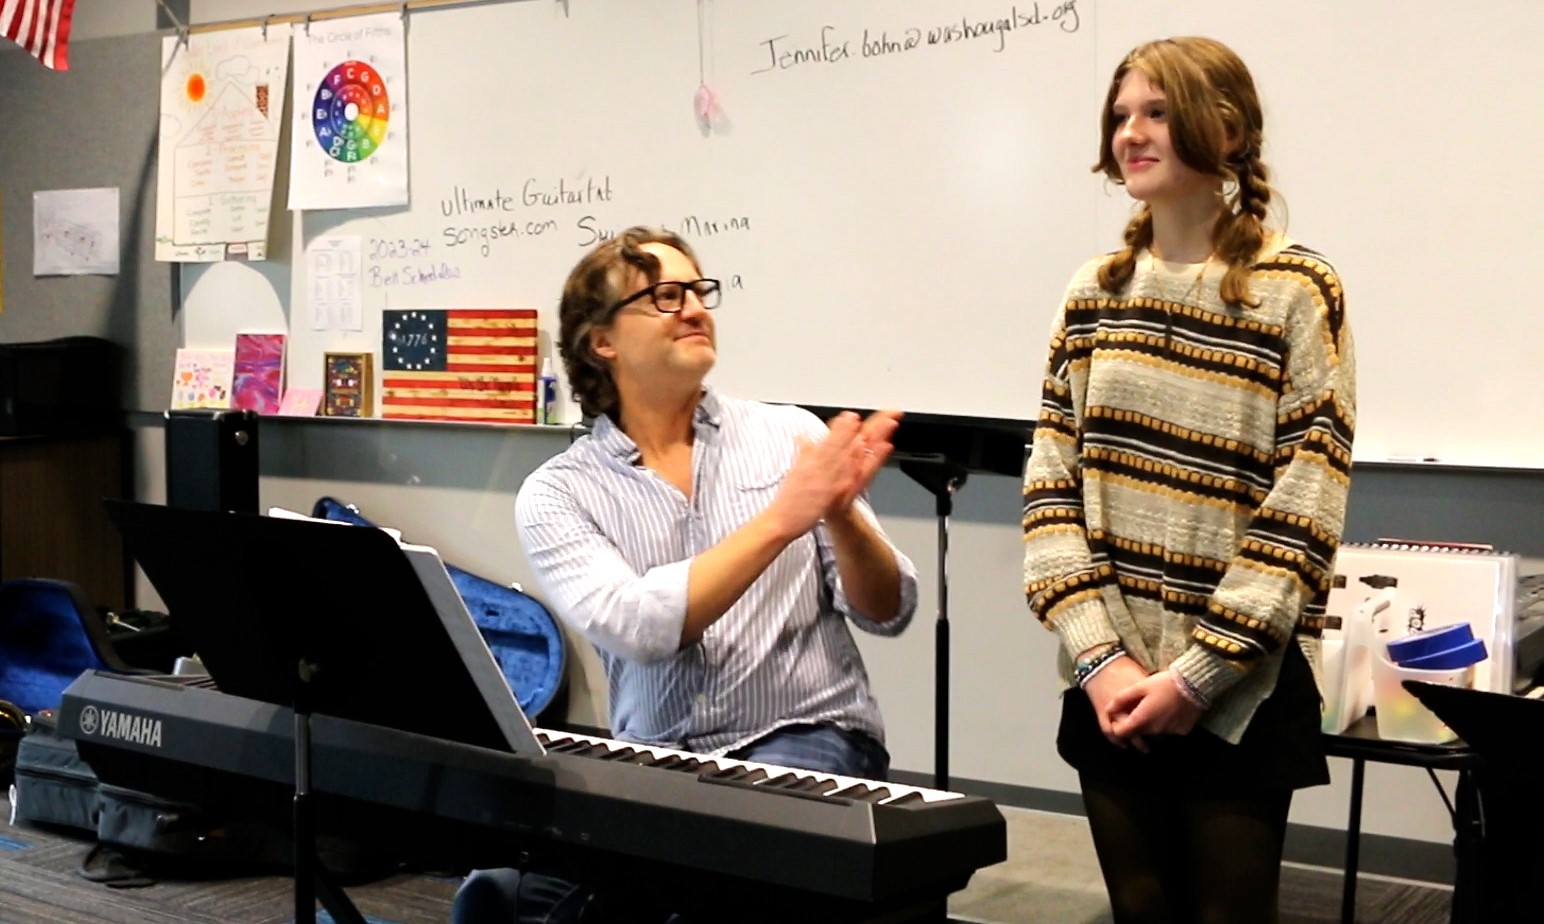 Adult sitting at piano claps while smiling at standing student next to him.